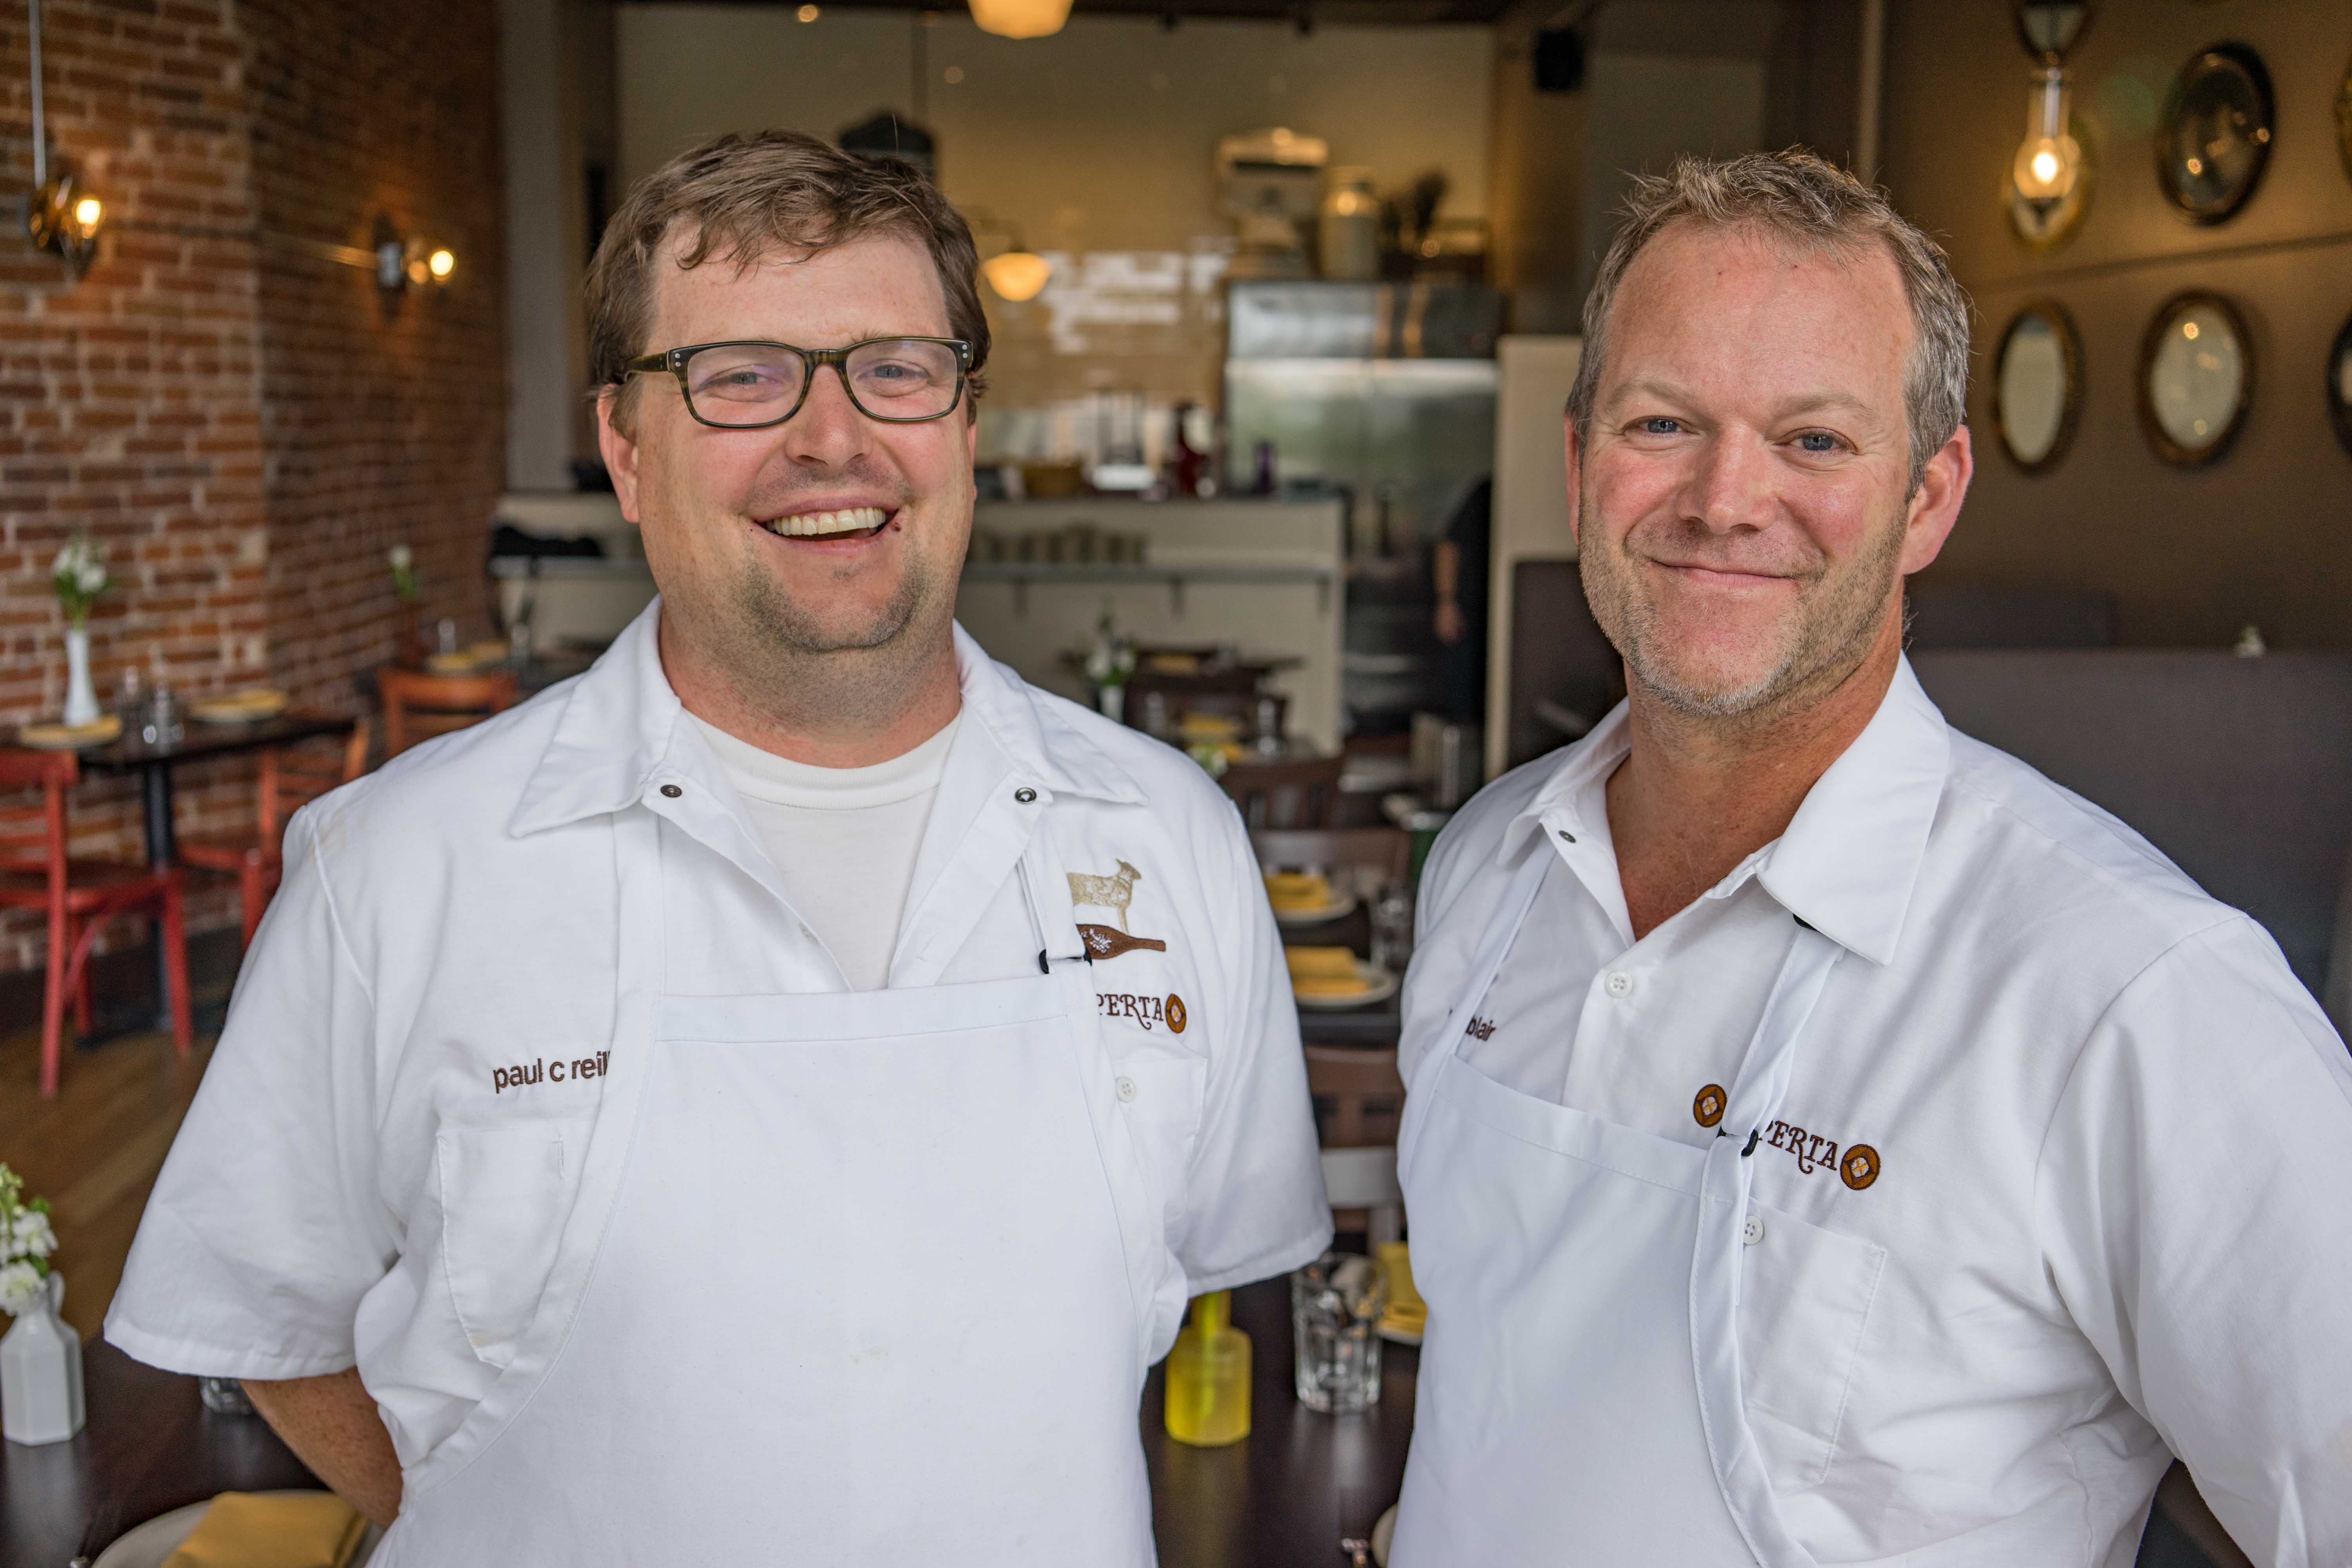 Chef Paul C. Reilly (right) and Bob Blair at beast + bottle's new sister restaurant Coperta.